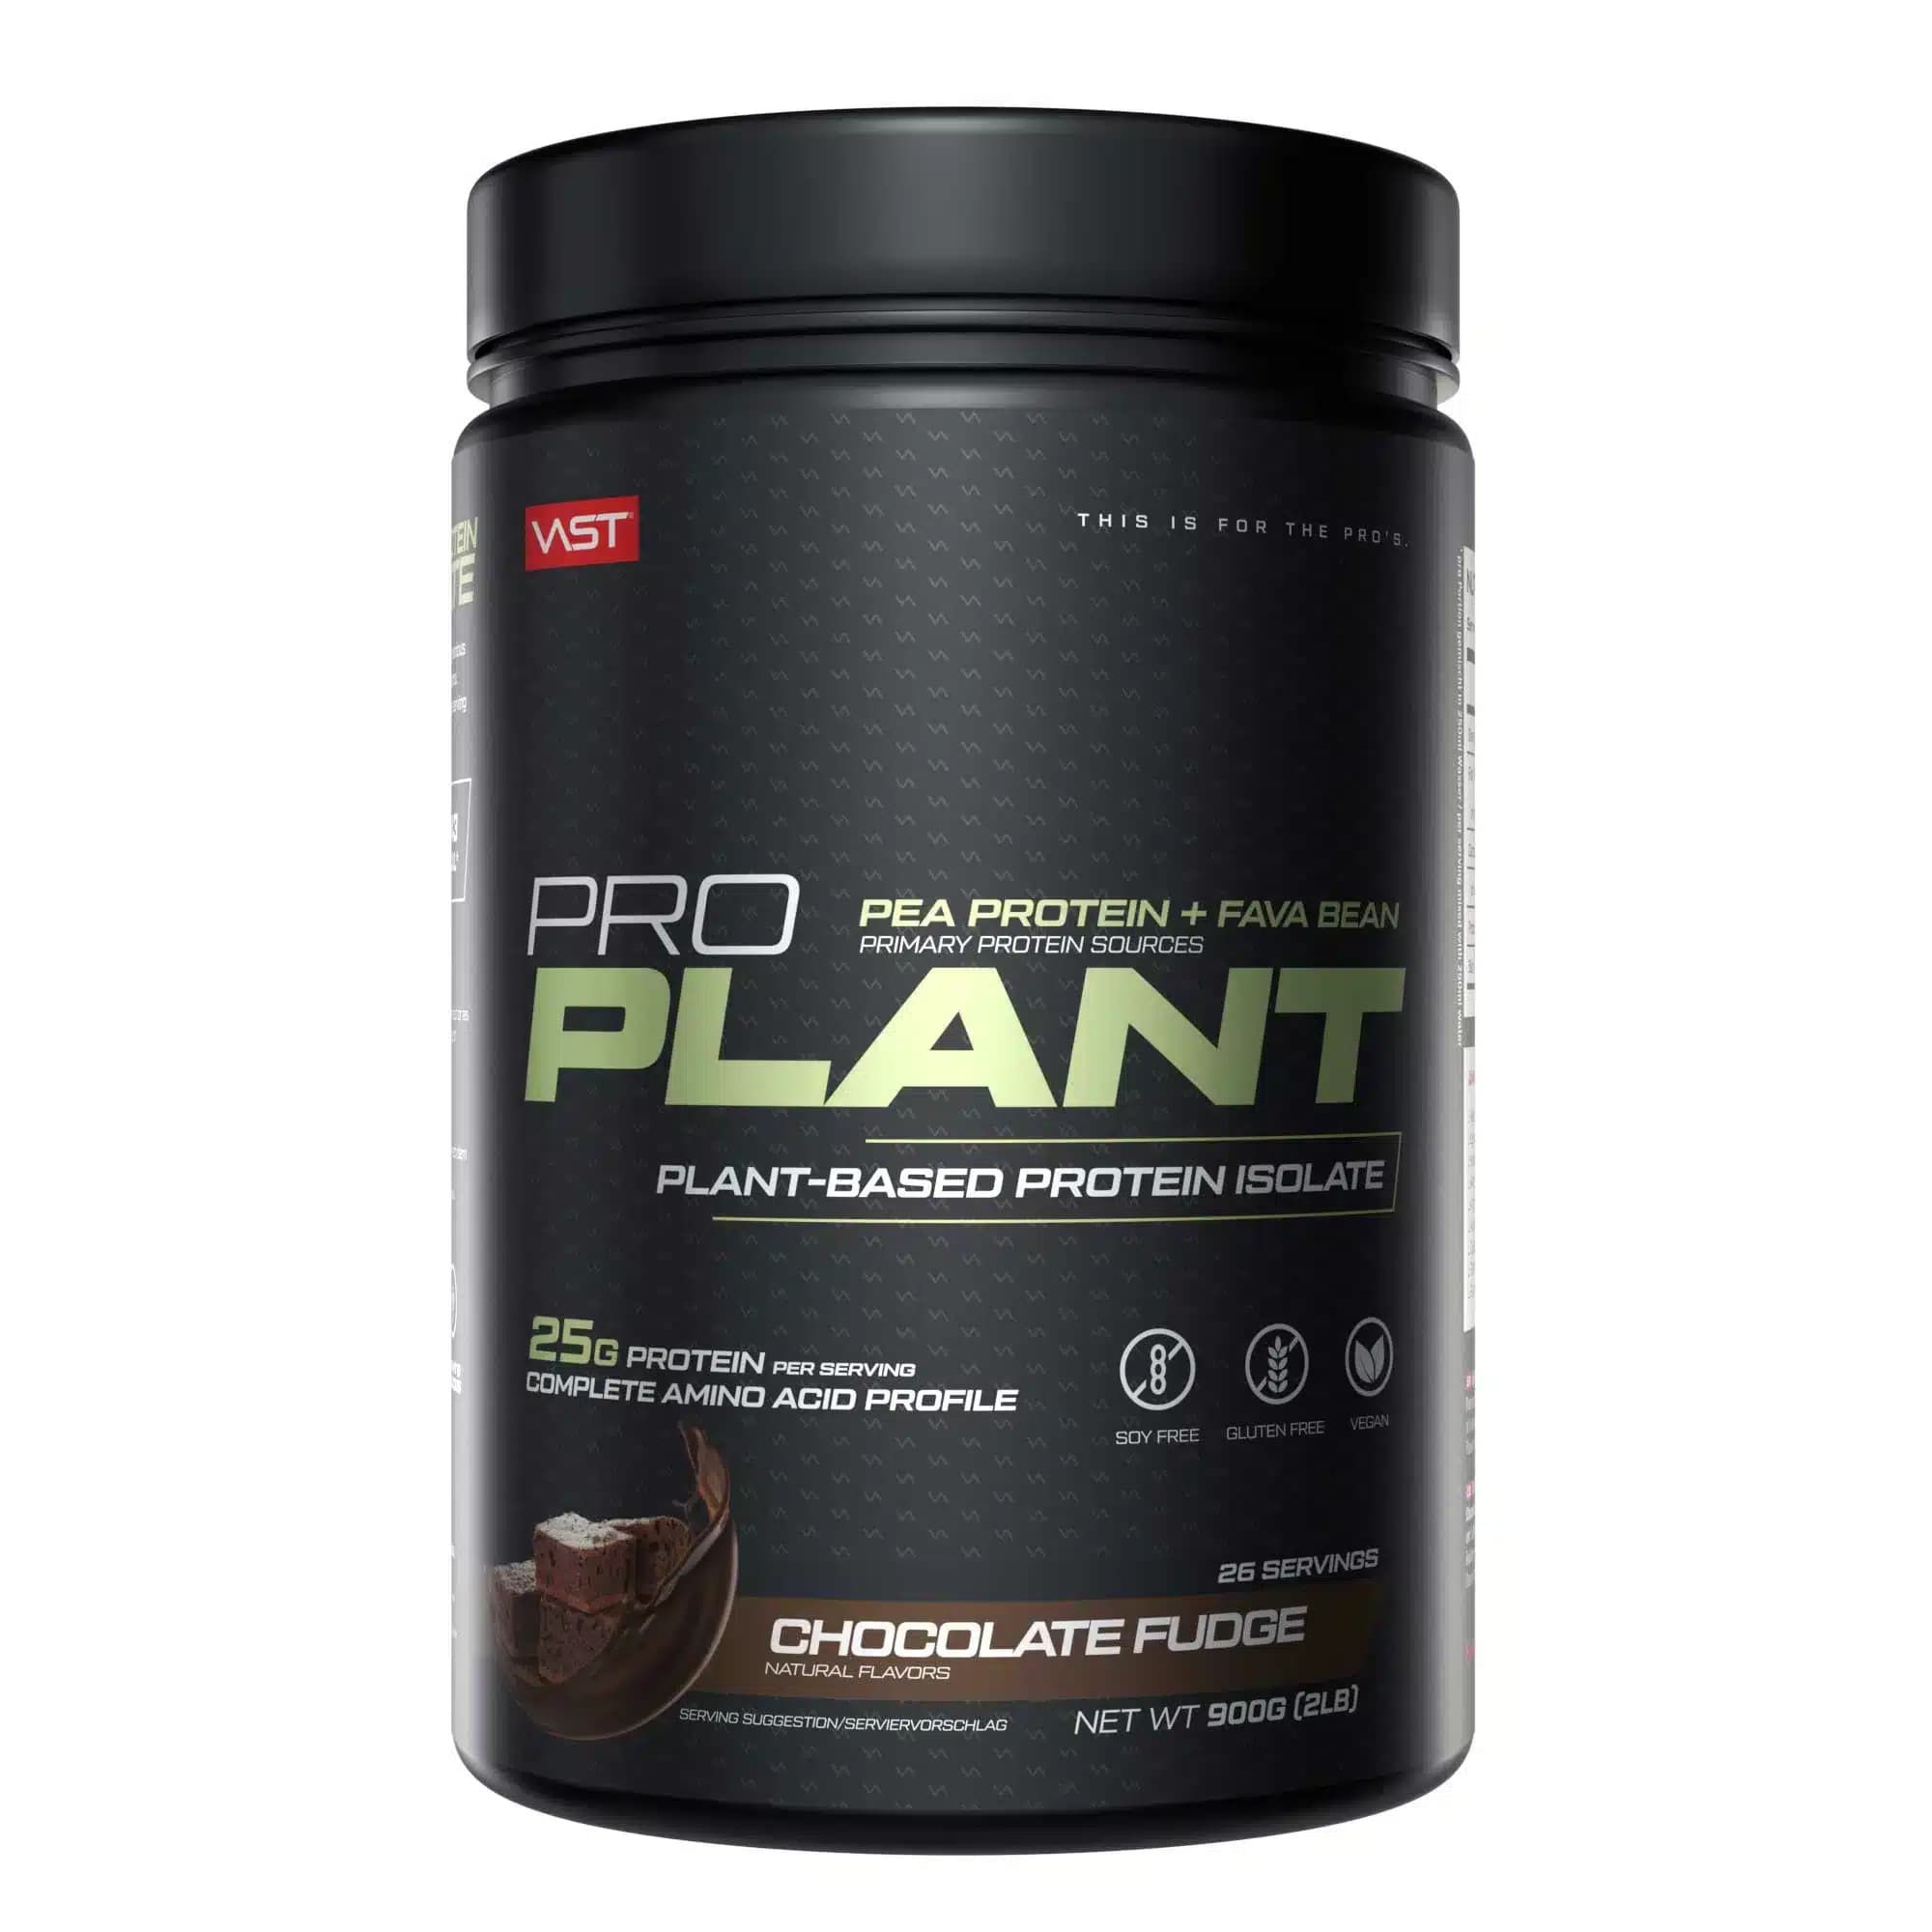 VAST Pro Plant Planted-Based Protein Isolate (900G Dose)